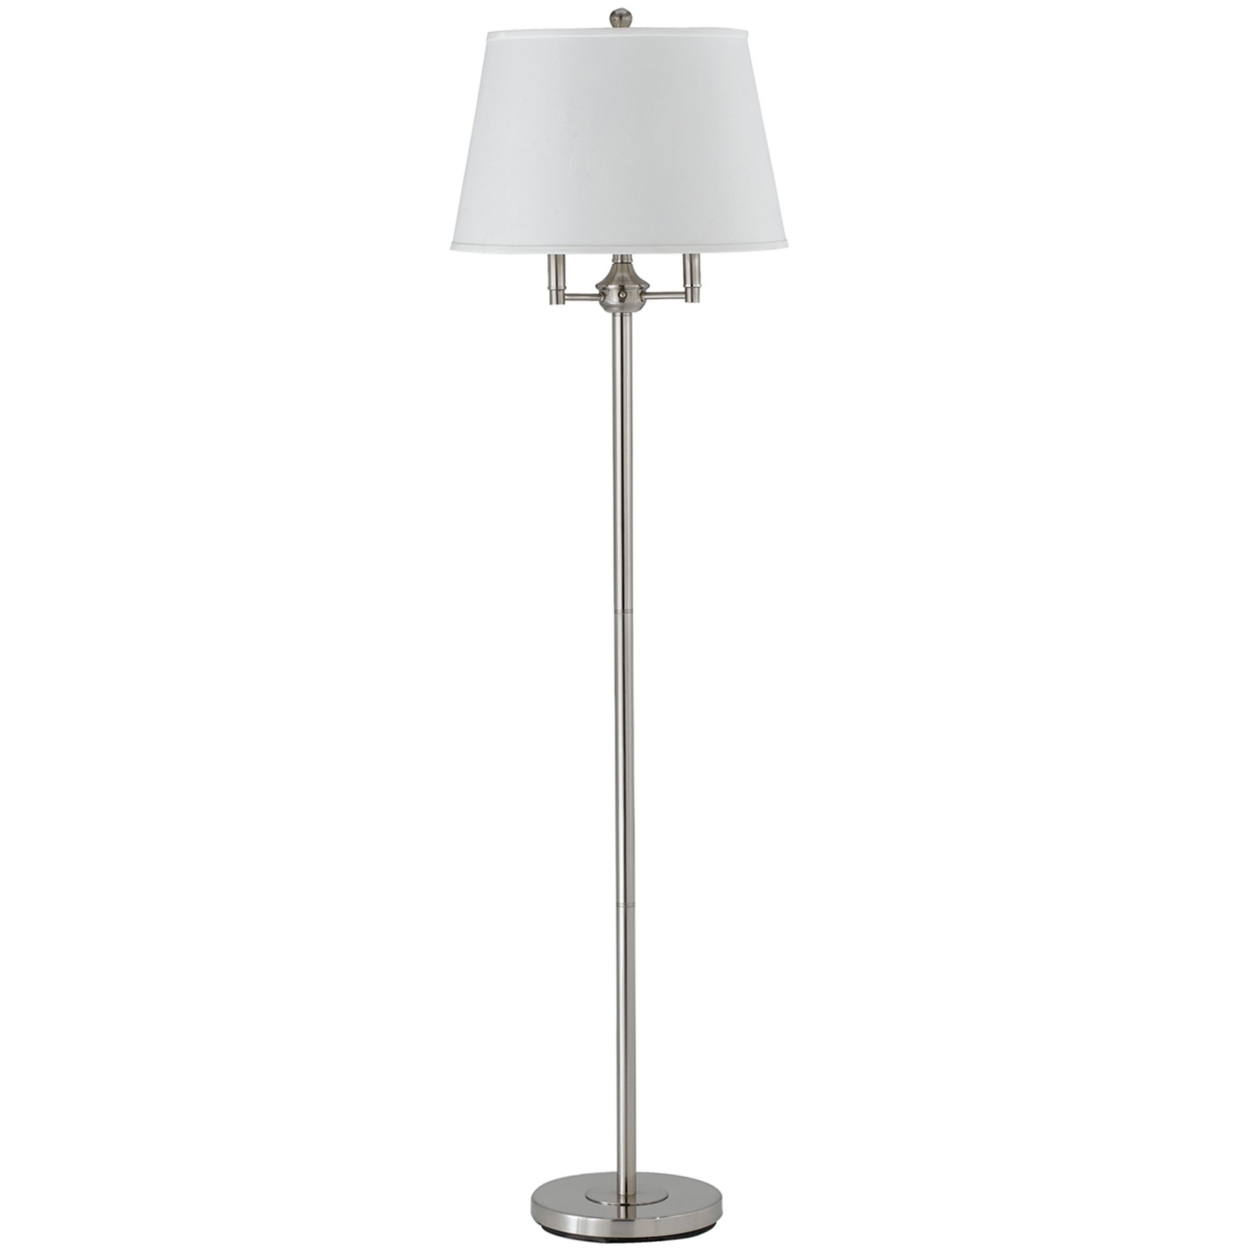 Metal Floor Lamp With Tapered Drum Shade And Stalk Support, Silver- Saltoro Sherpi